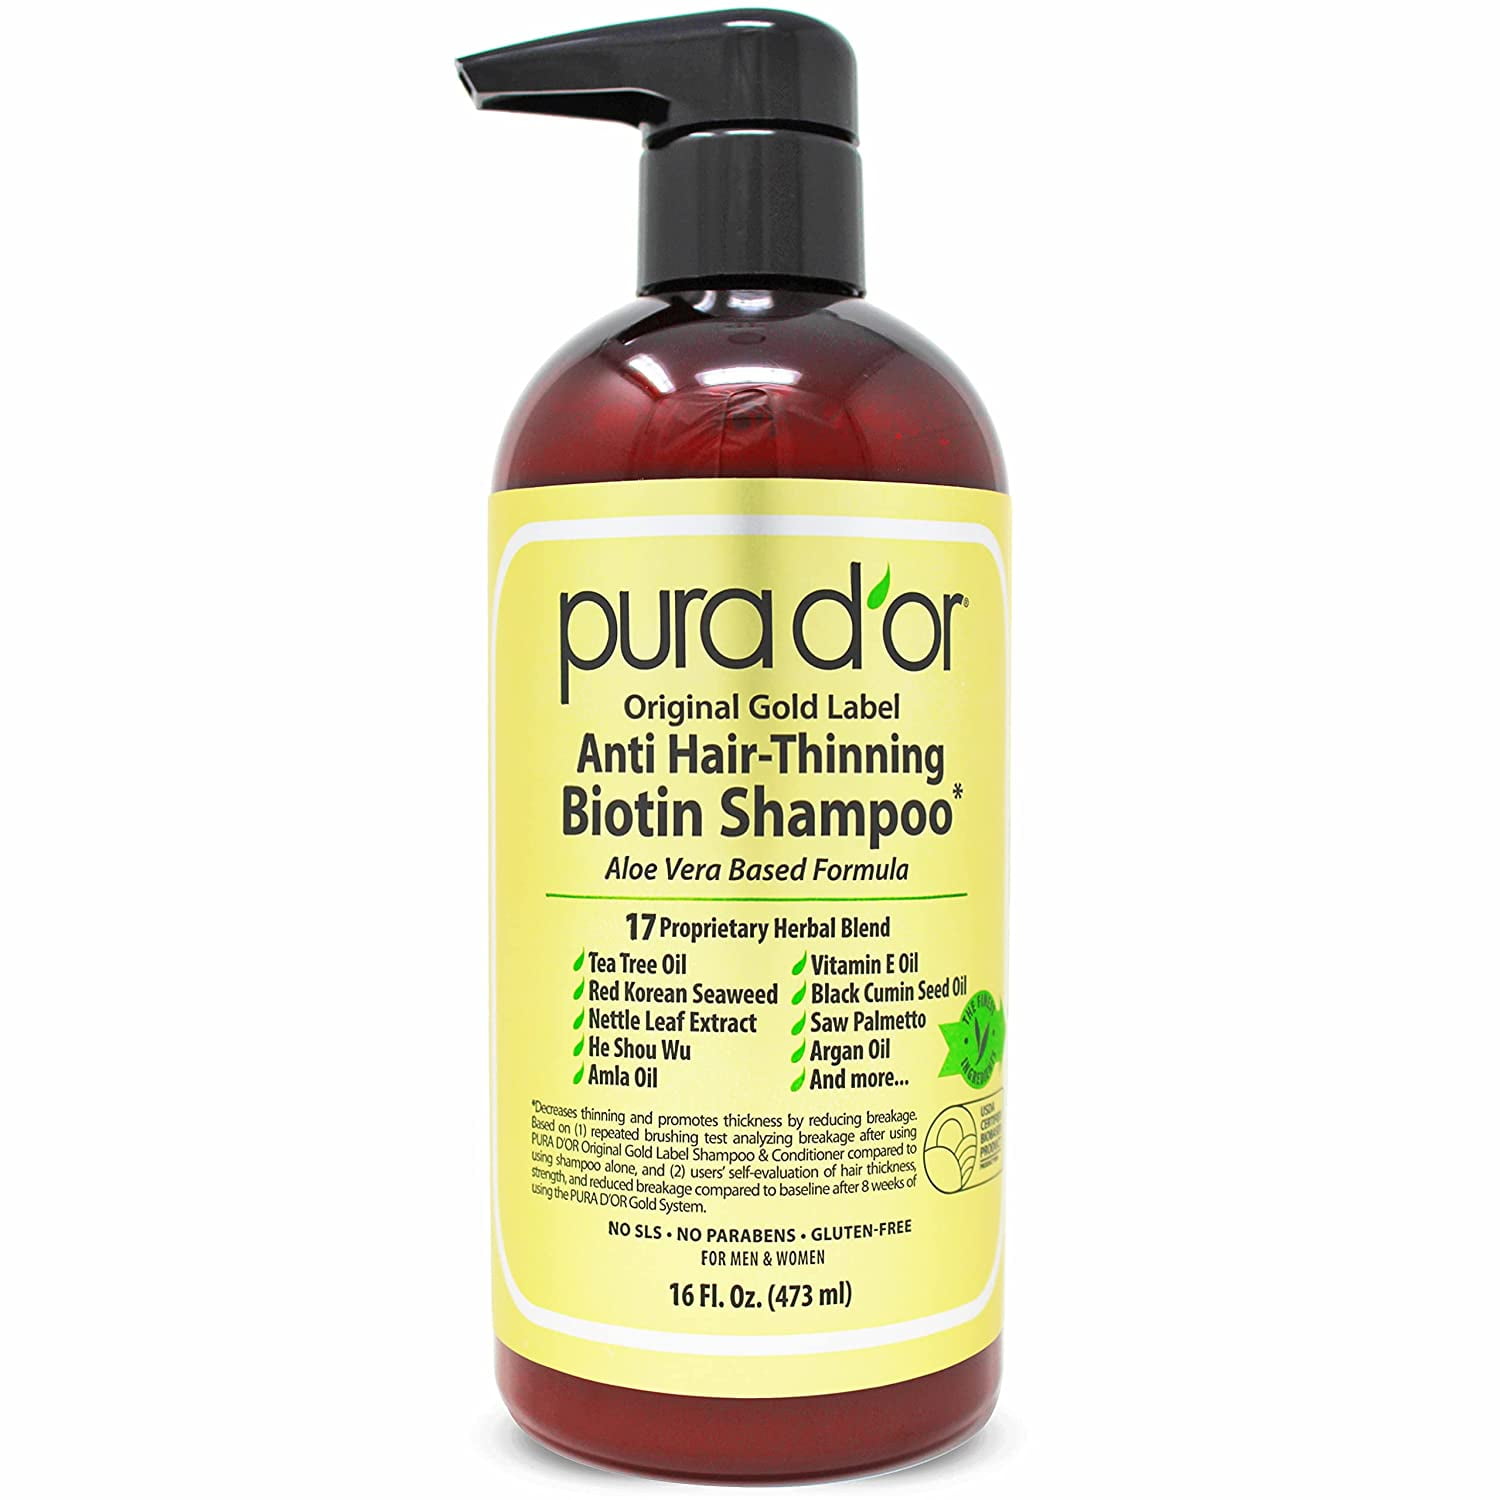 PURA D'OR Original Gold Label Anti-Thinning Biotin Shampoo, TESTED Proven Results, Herbal Blocker Hair Thickening Products For Women & Men, Natural Shampoo For Color Treated Hair, - Walmart.com